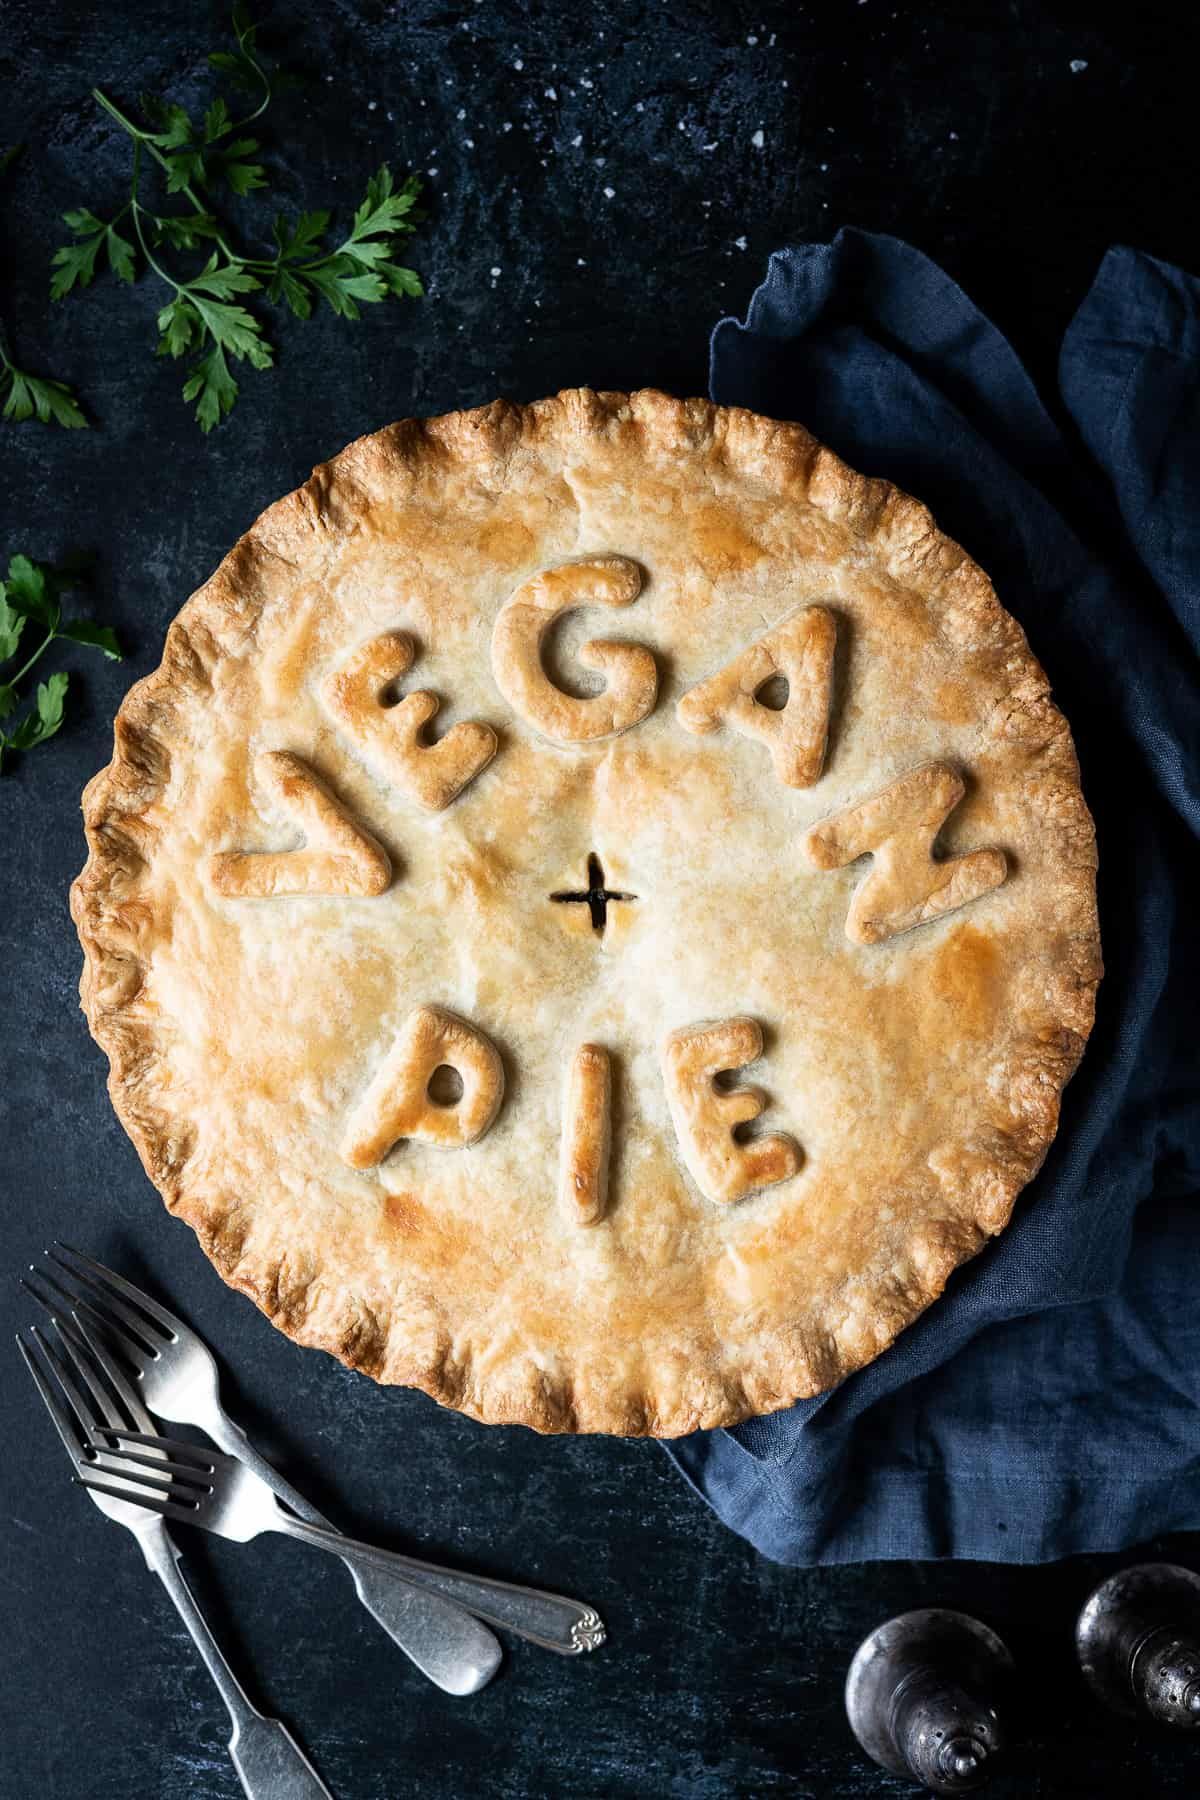 looking down at a vegan chickpea leek and nushroom pie with the words "vegan pie" created on the lid in pastry